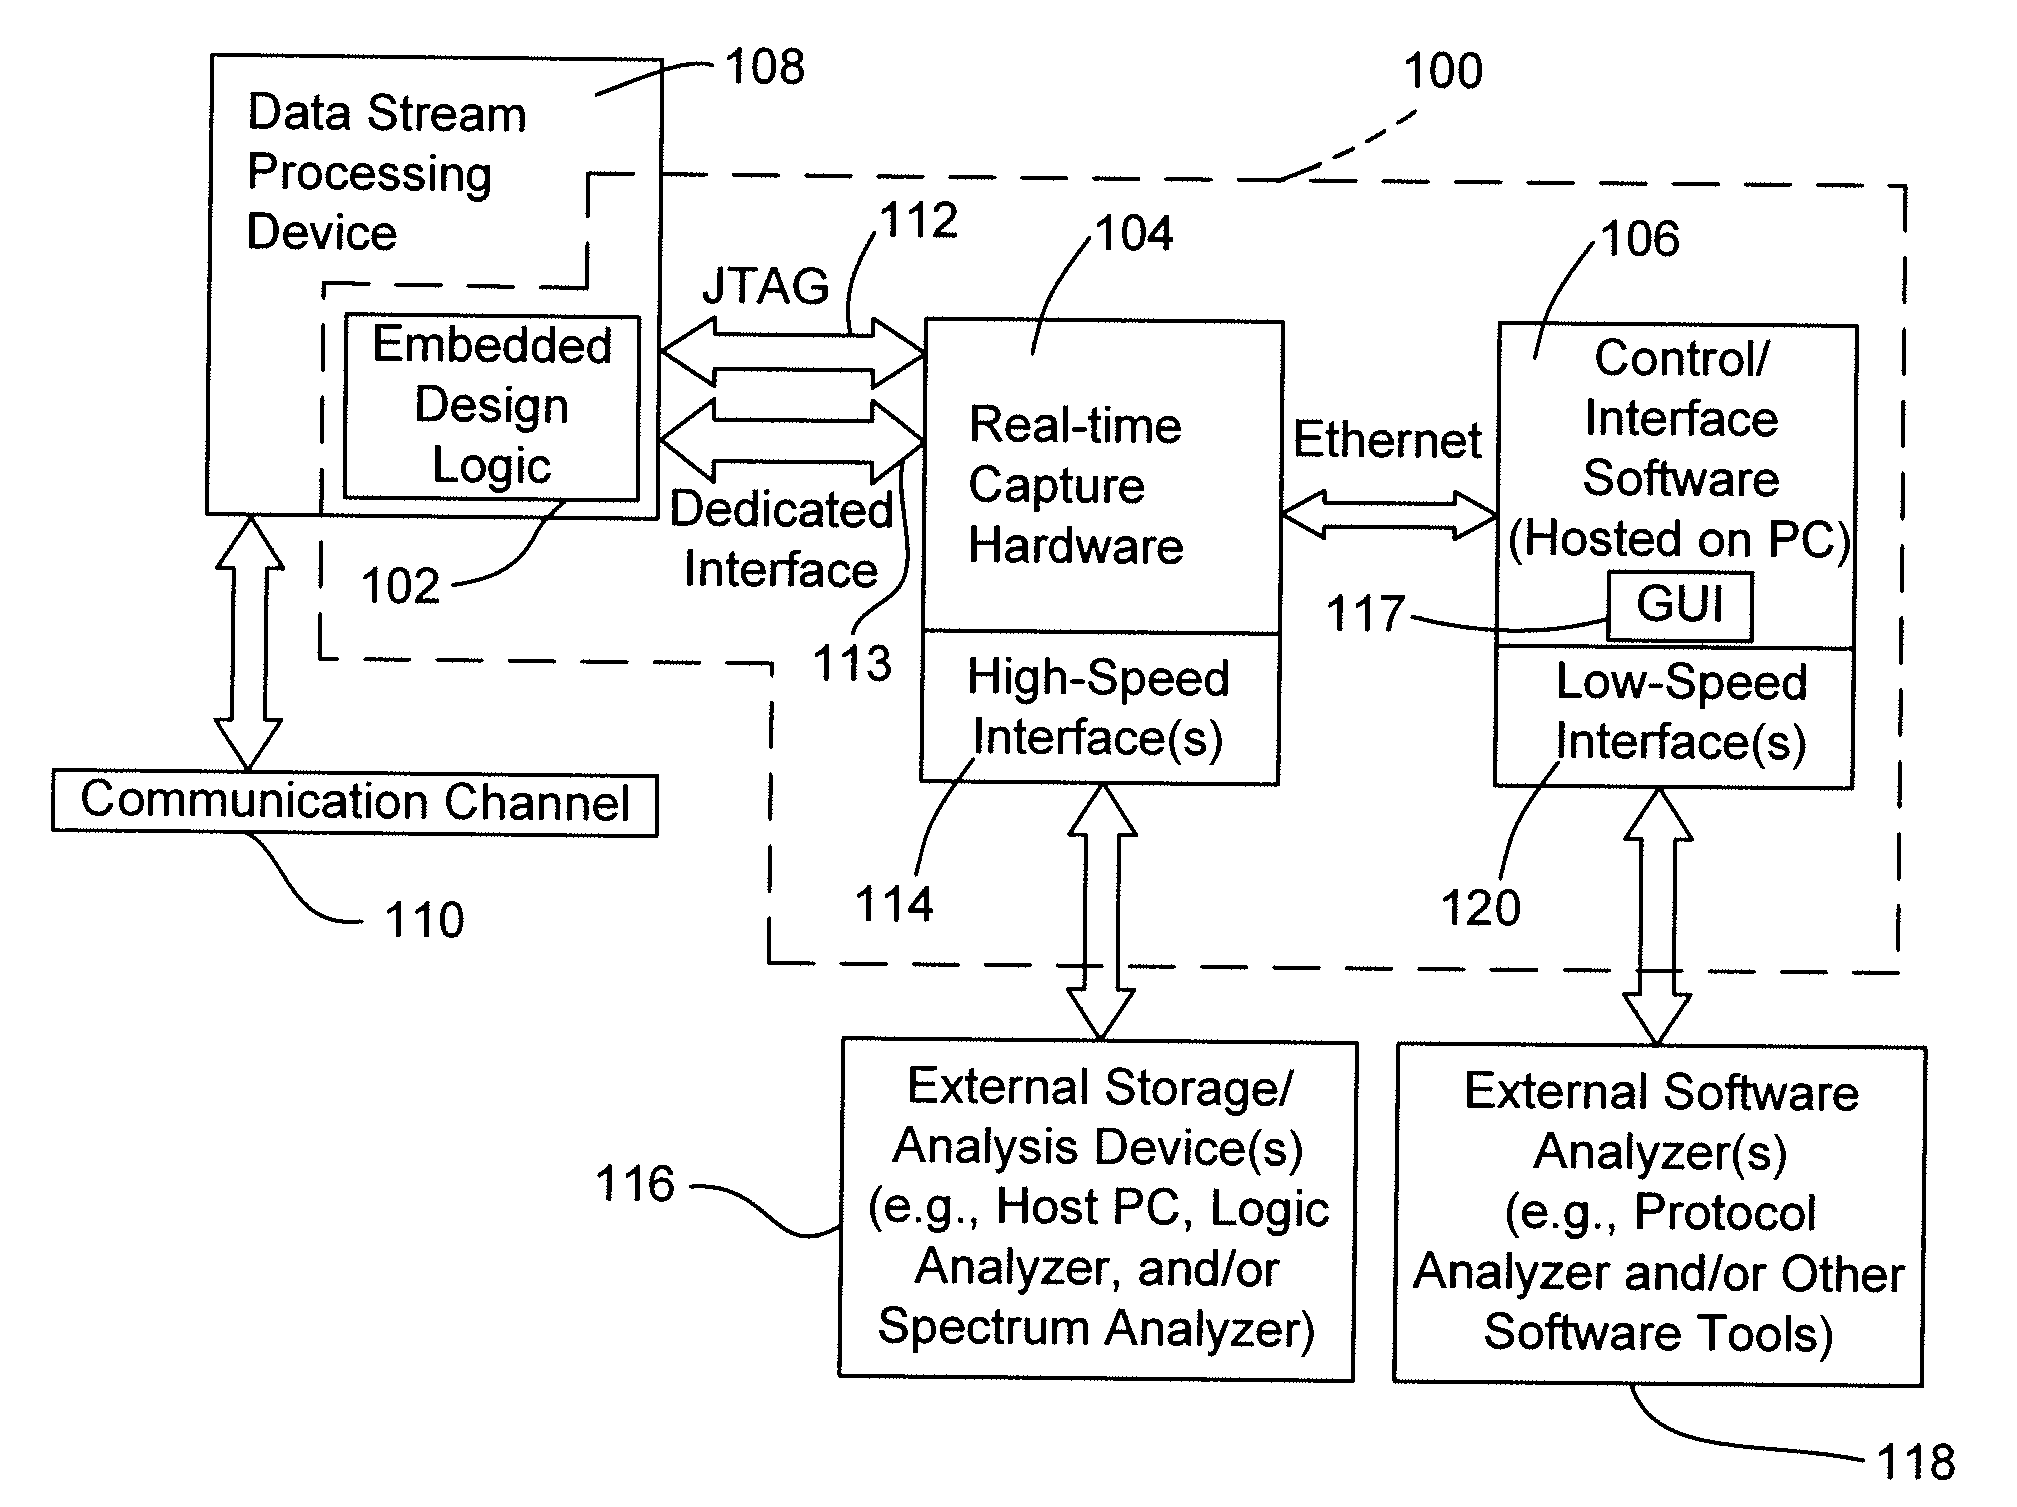 Systems and methods for data stream analysis using embedded design logic